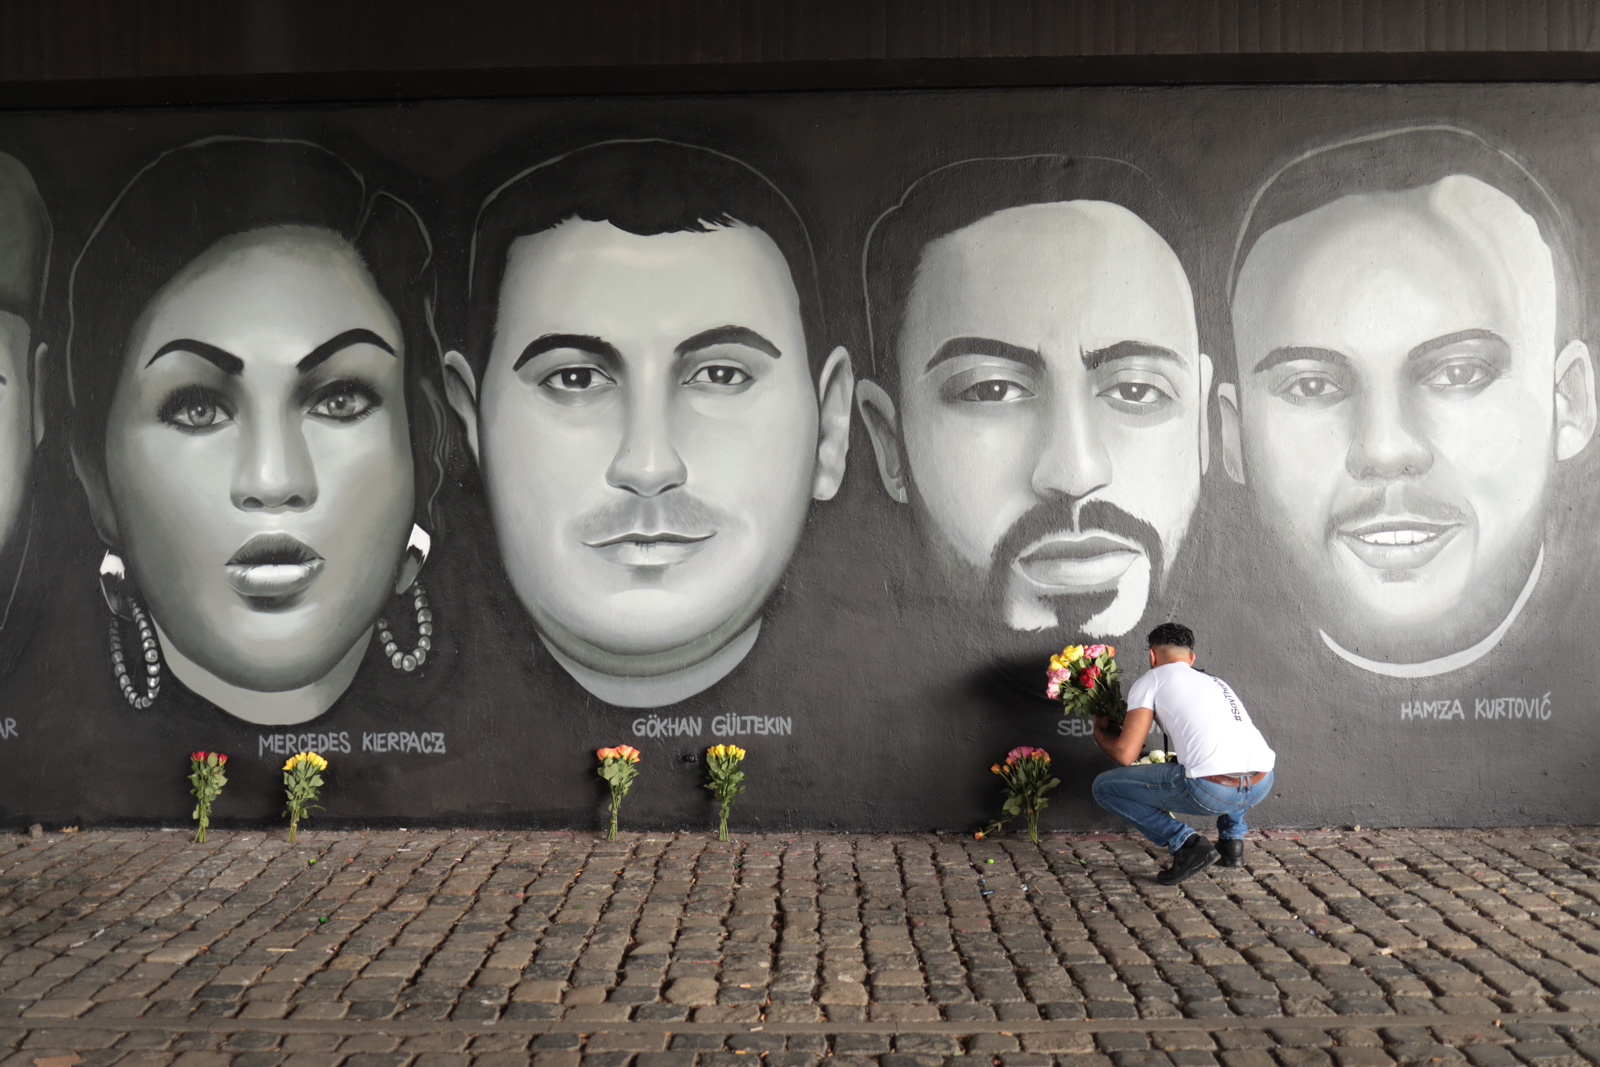 A mural in memory of the Hanau attack victims